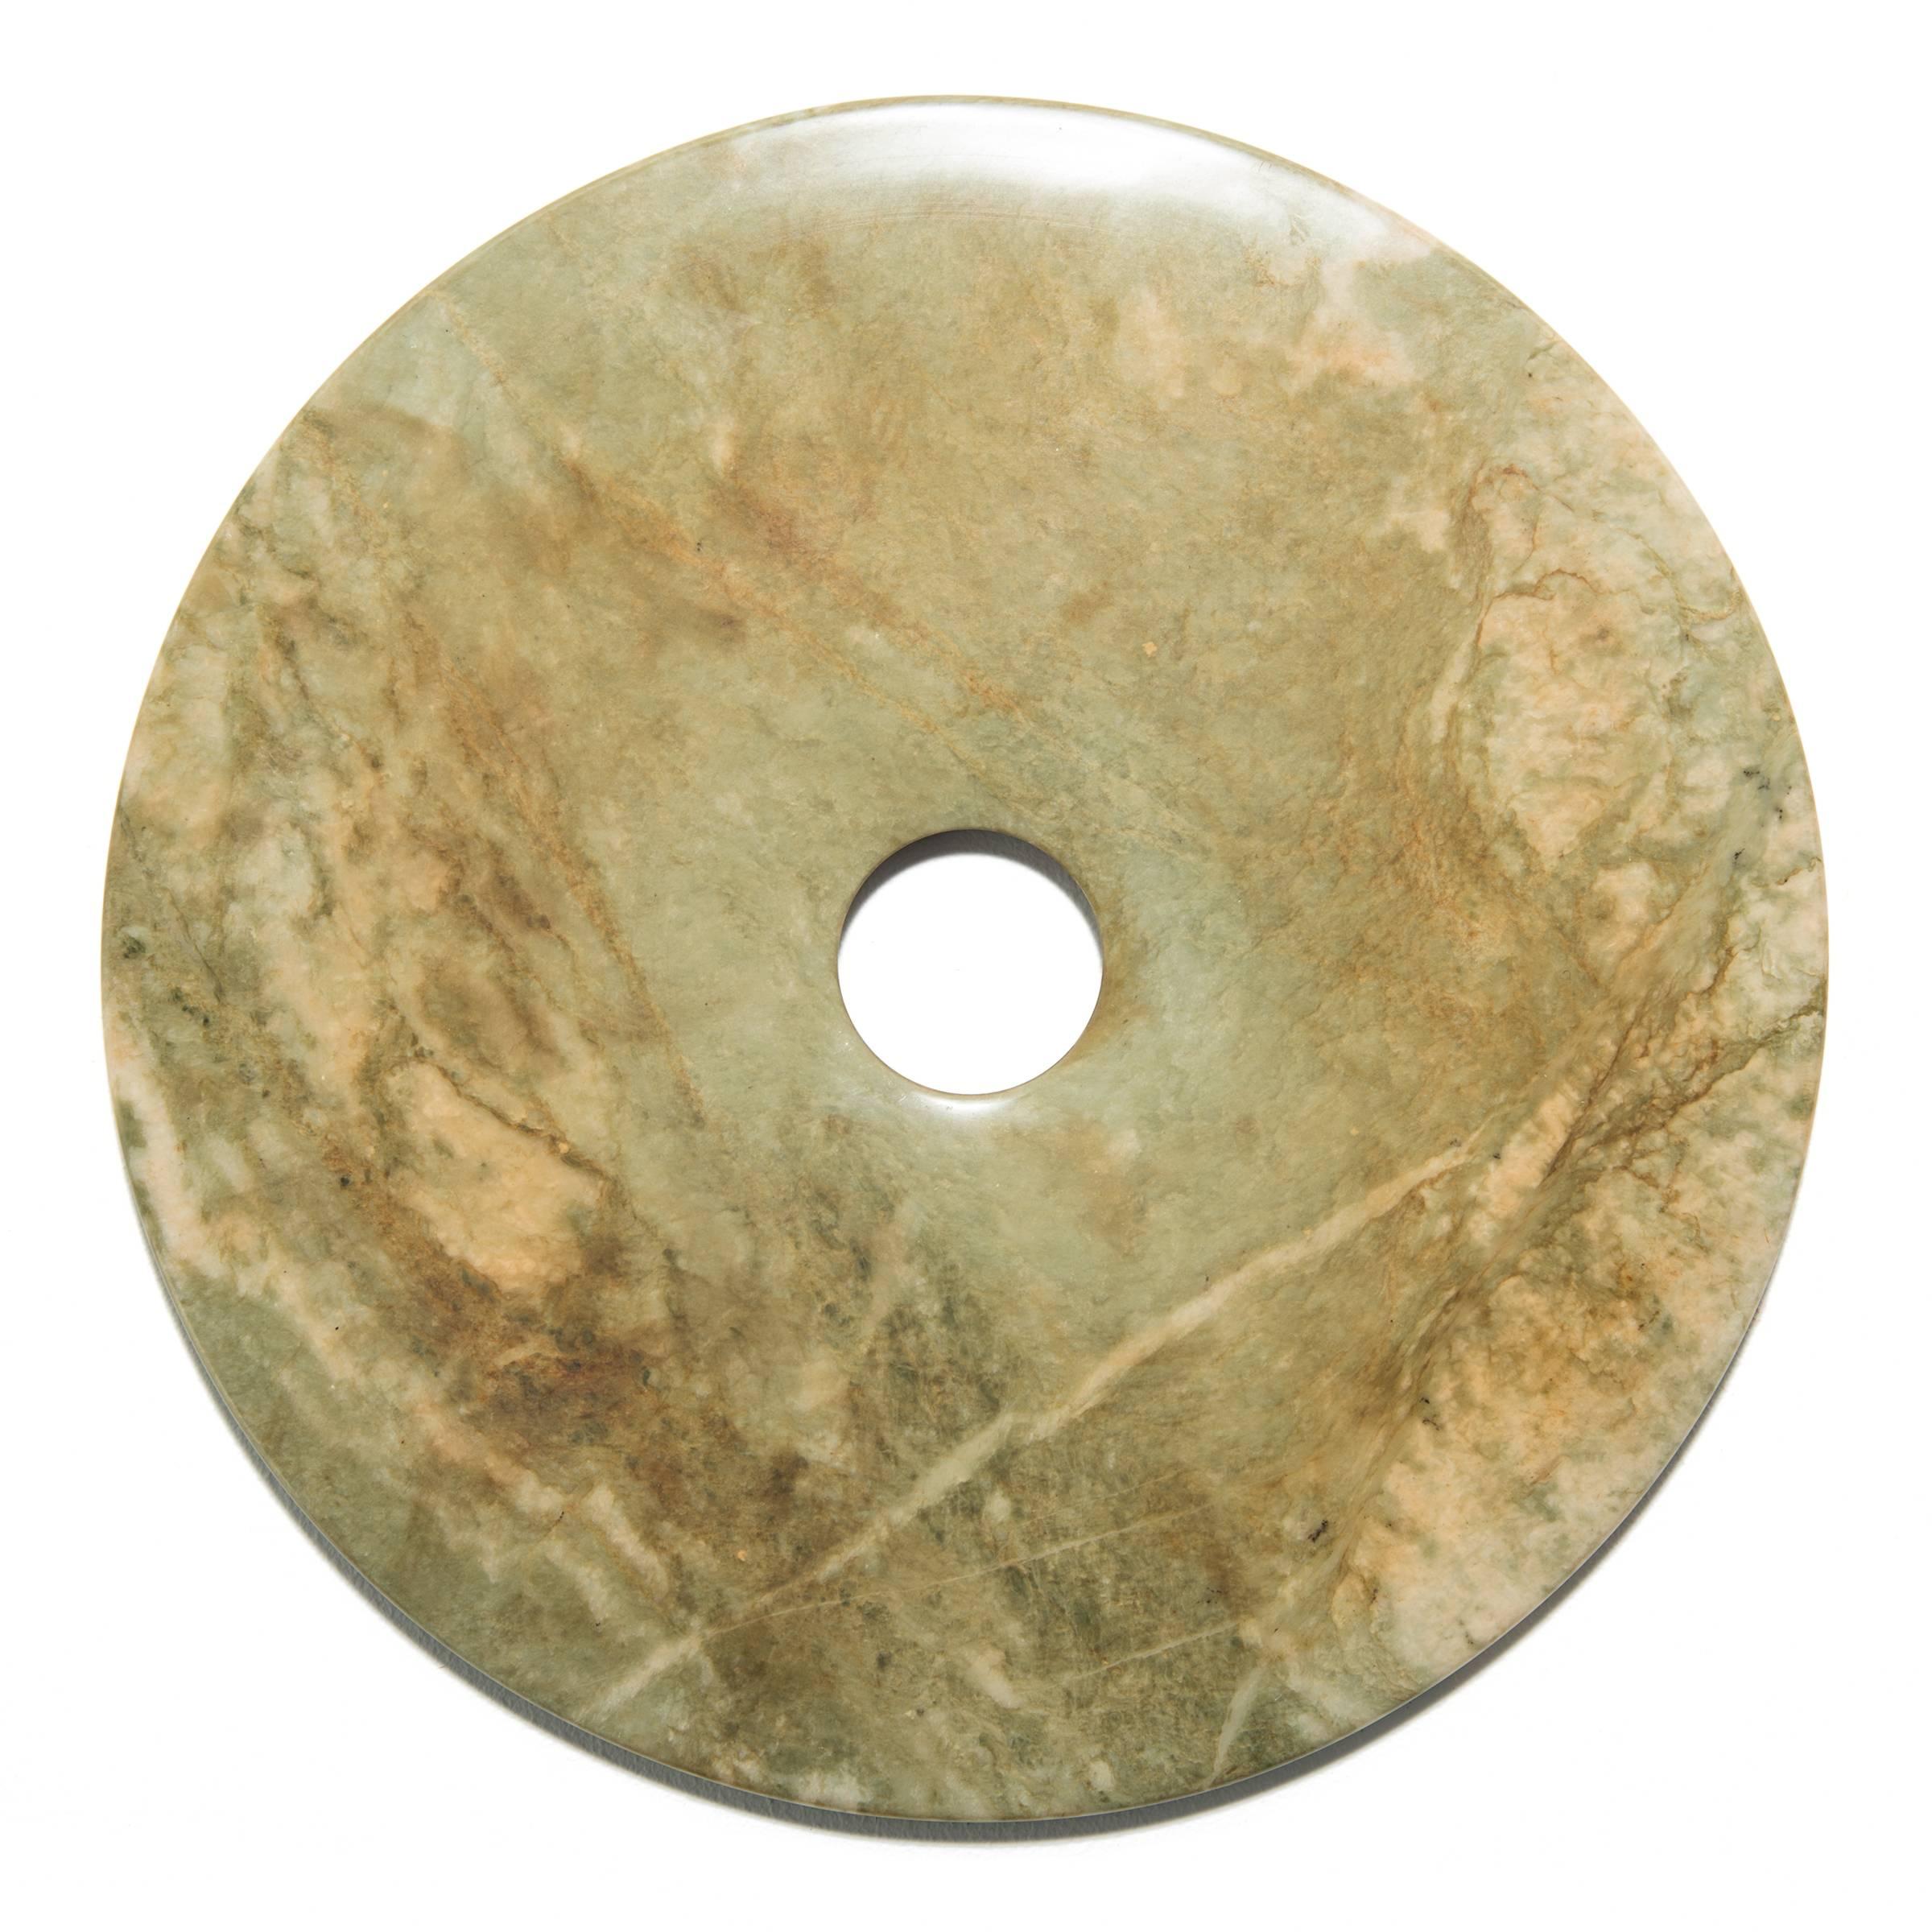 This mottled green and white disc is particularly striking in its custom mount. Shaping this hard stone takes considerable skill. An artisan imbues the jade with this soft, satiny glow by patiently rubbing the surface with sand, a subtle beauty